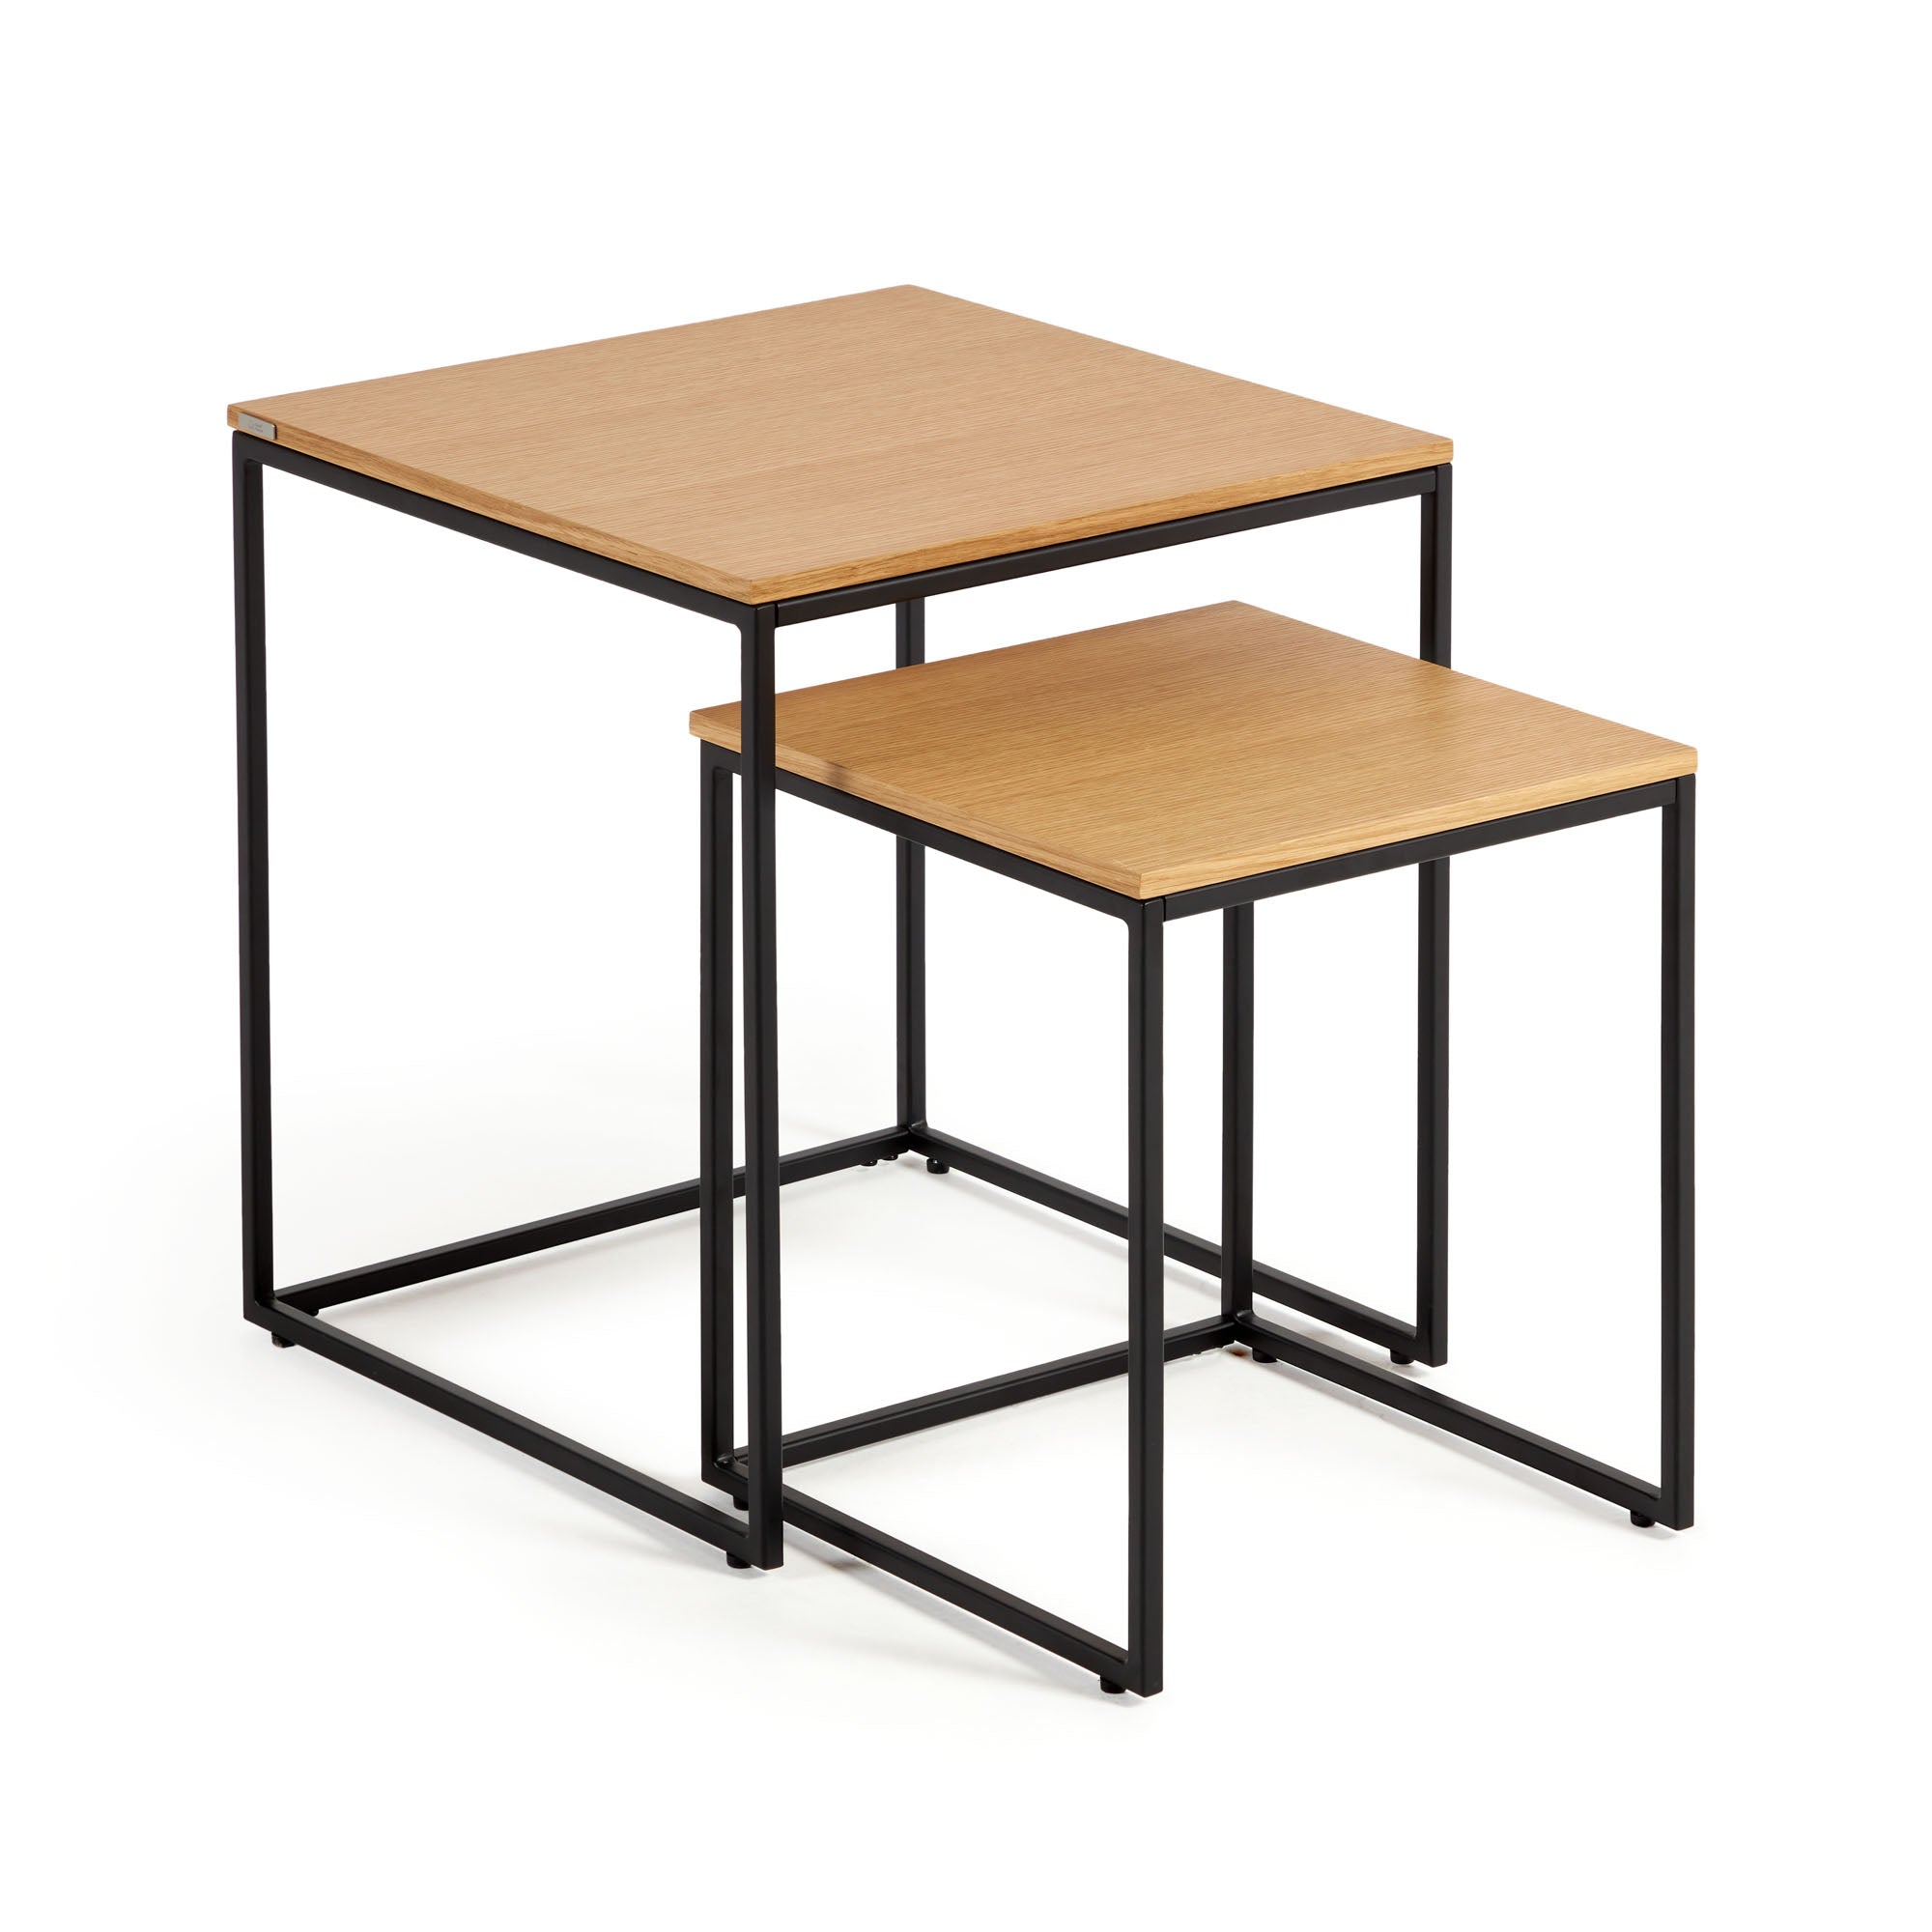 Yoana set of 2 nesting side tables with oak wood veneer and black painted metal structure